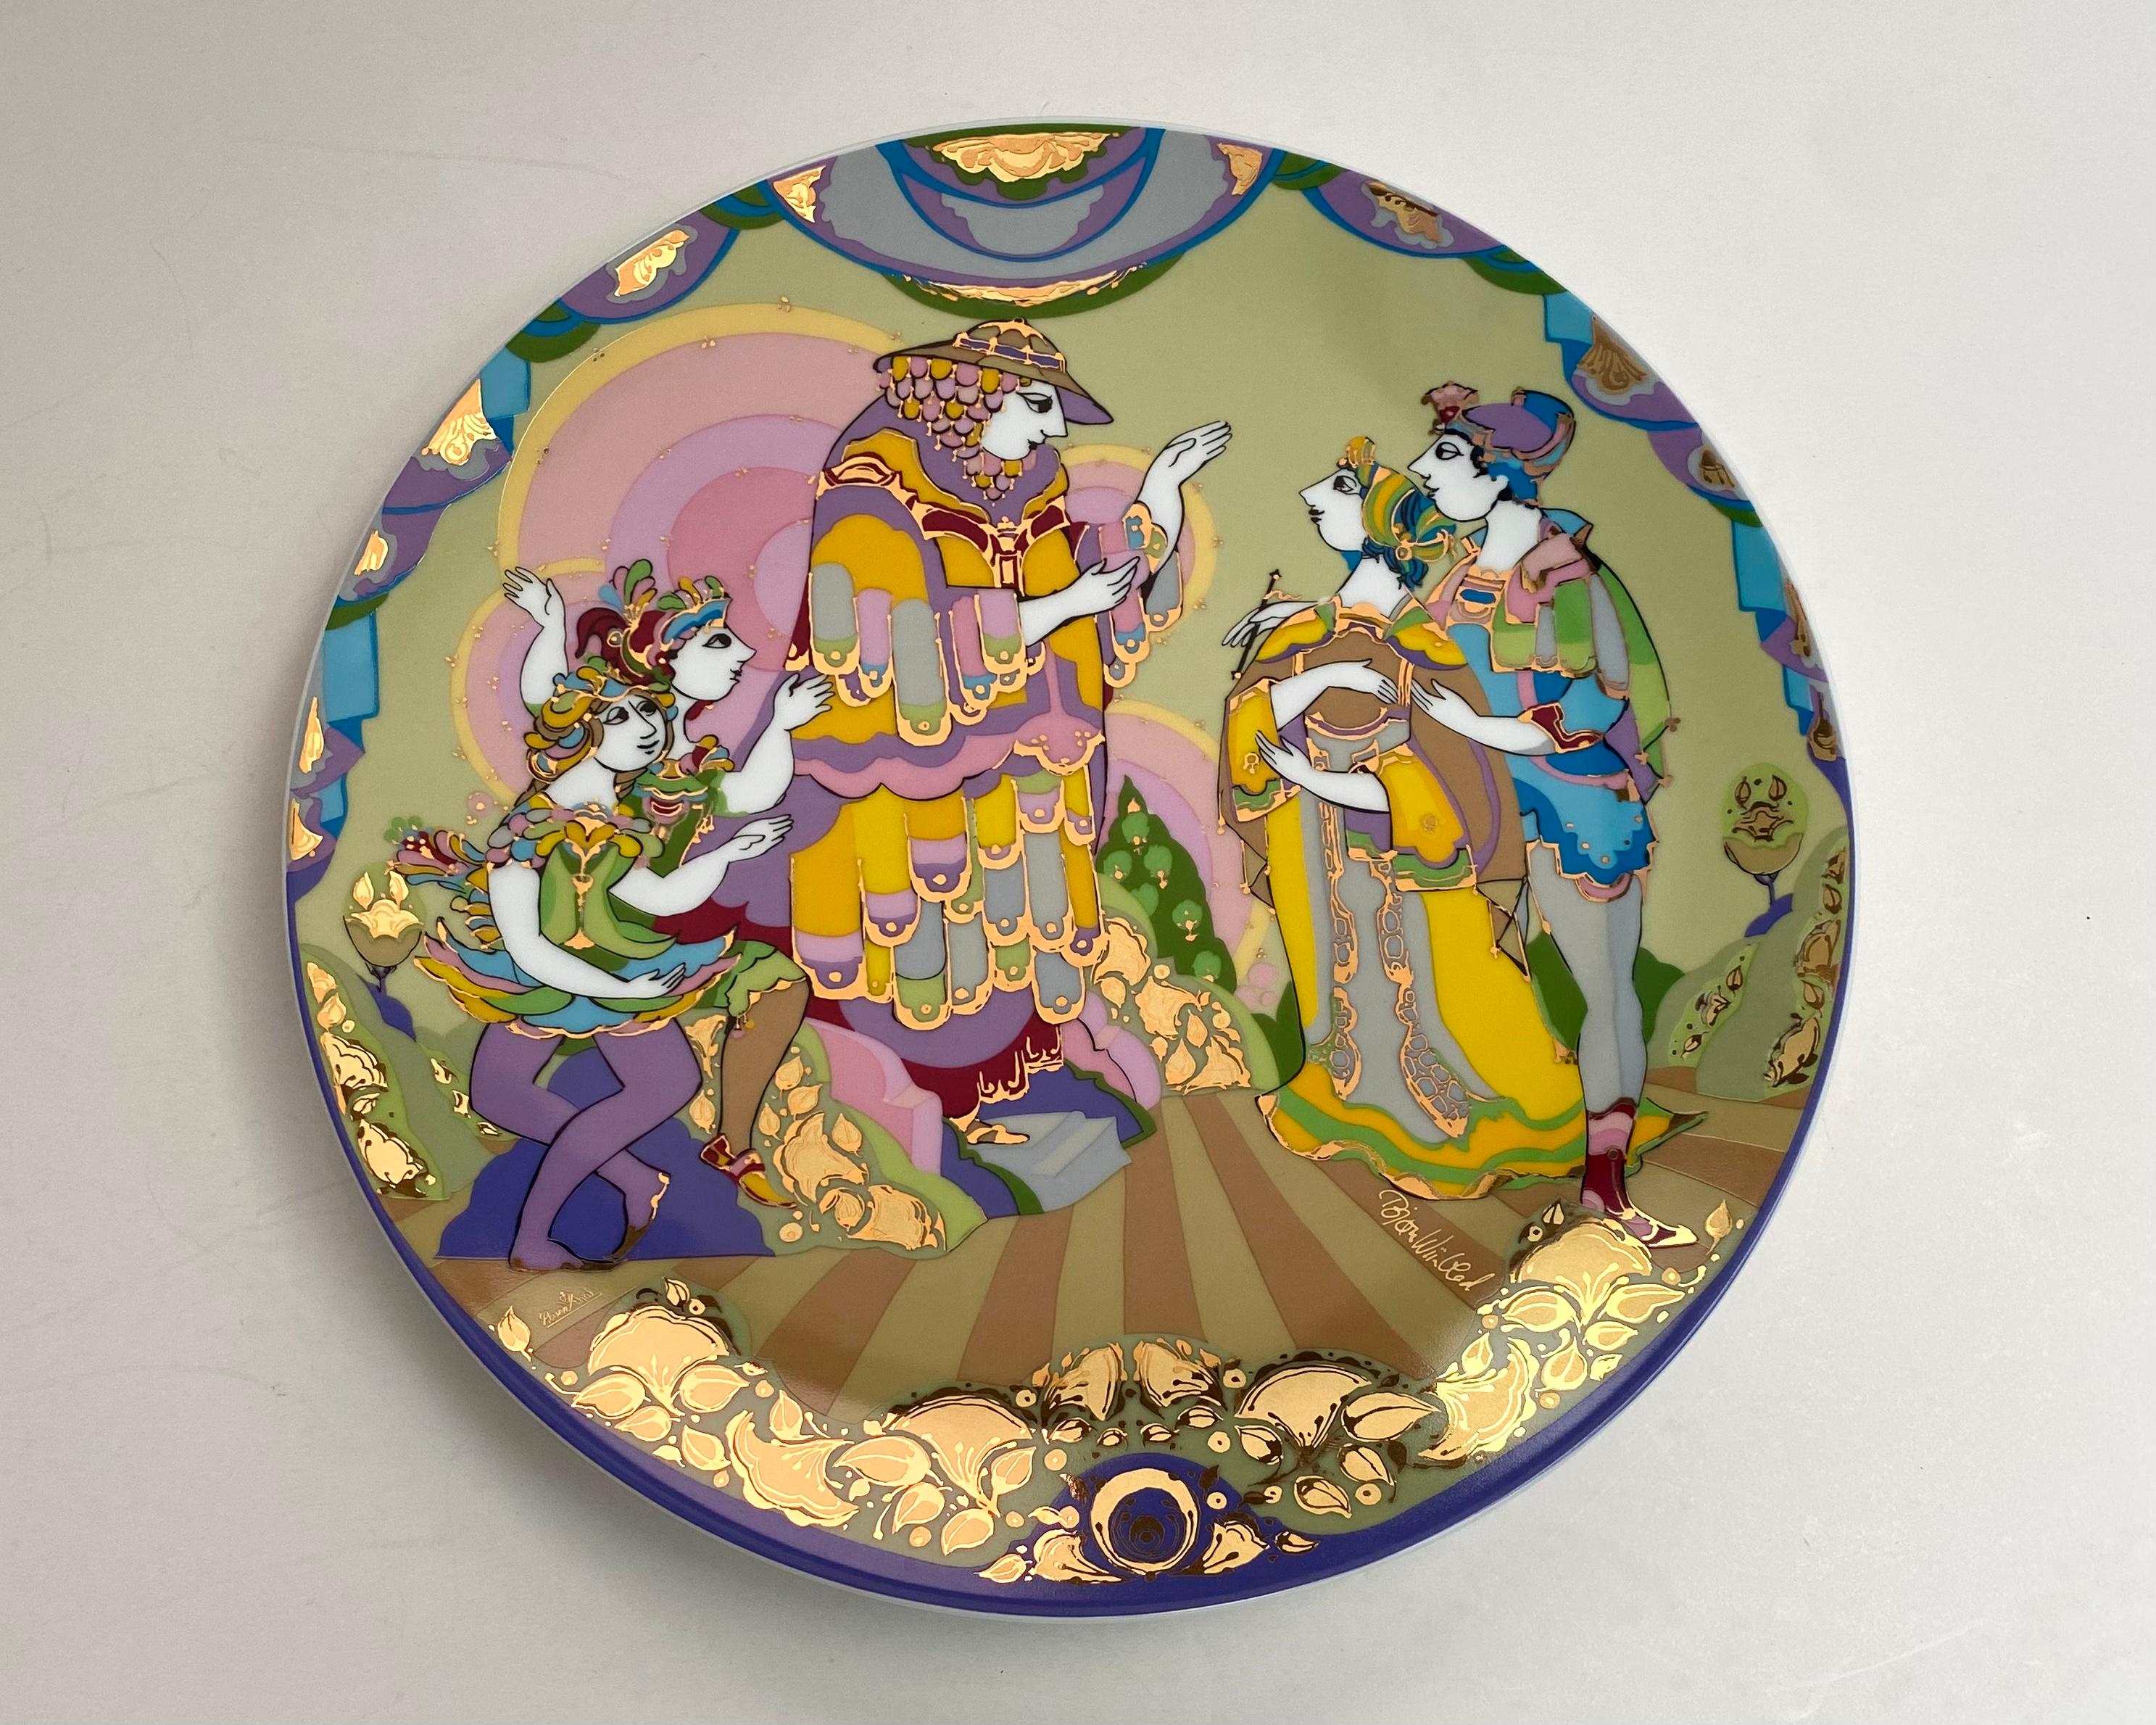 This collector plate from Rosenthal features a beautiful design inspired by Mozart's 